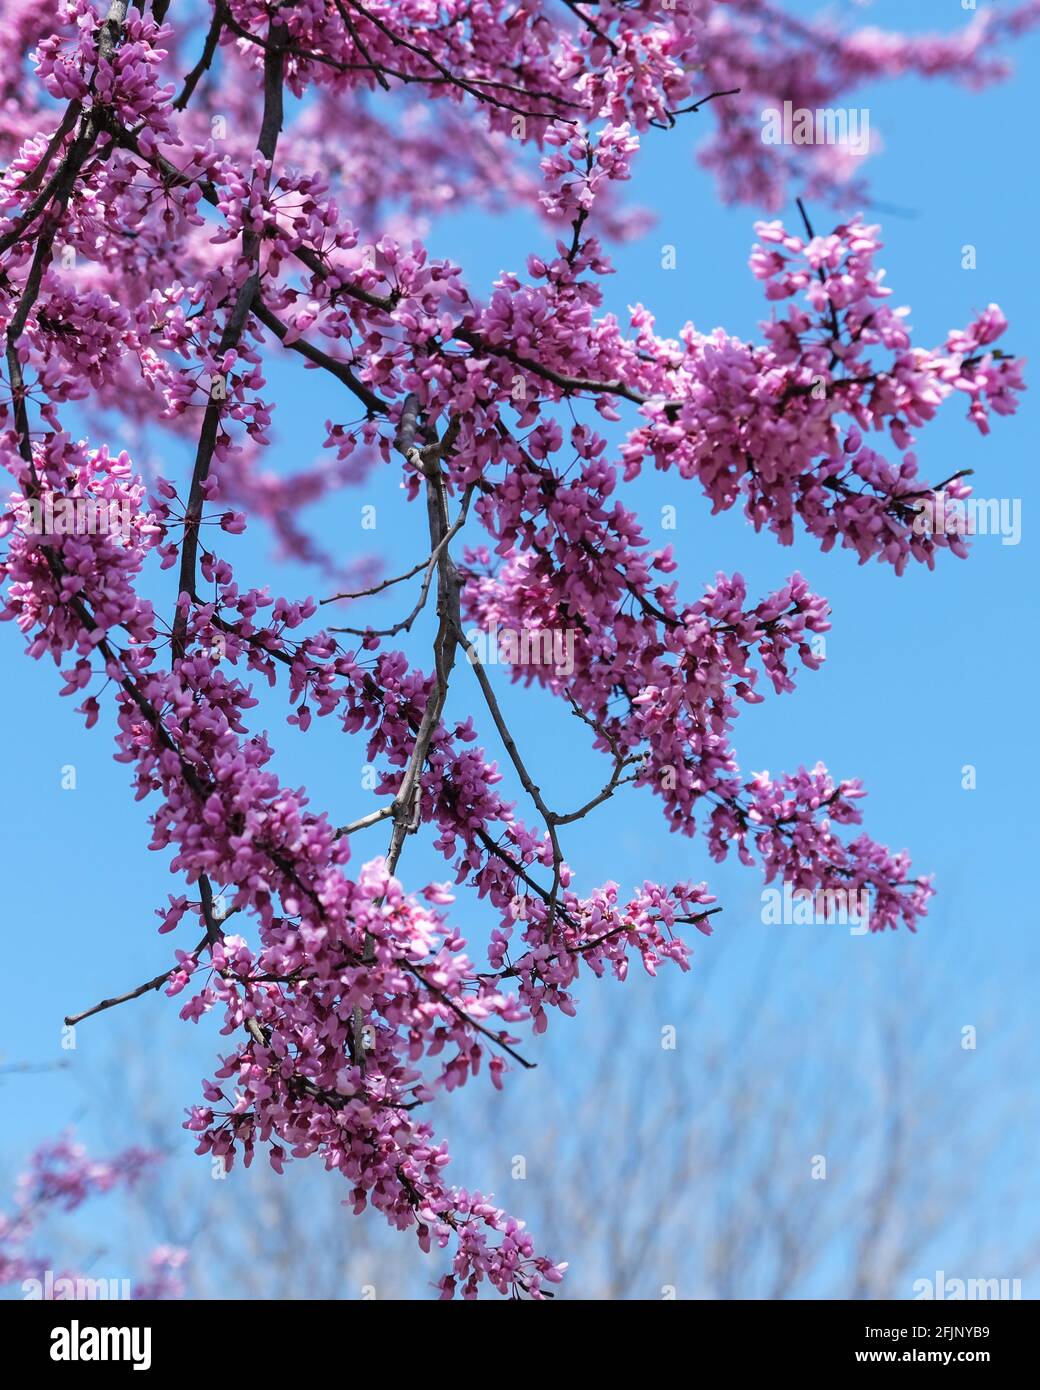 Closeup of branches of Eastern redbud tree in bloom, Cercis canadensis, against a blue sky. Springtime in Wichita, Kansas, USA. Stock Photo